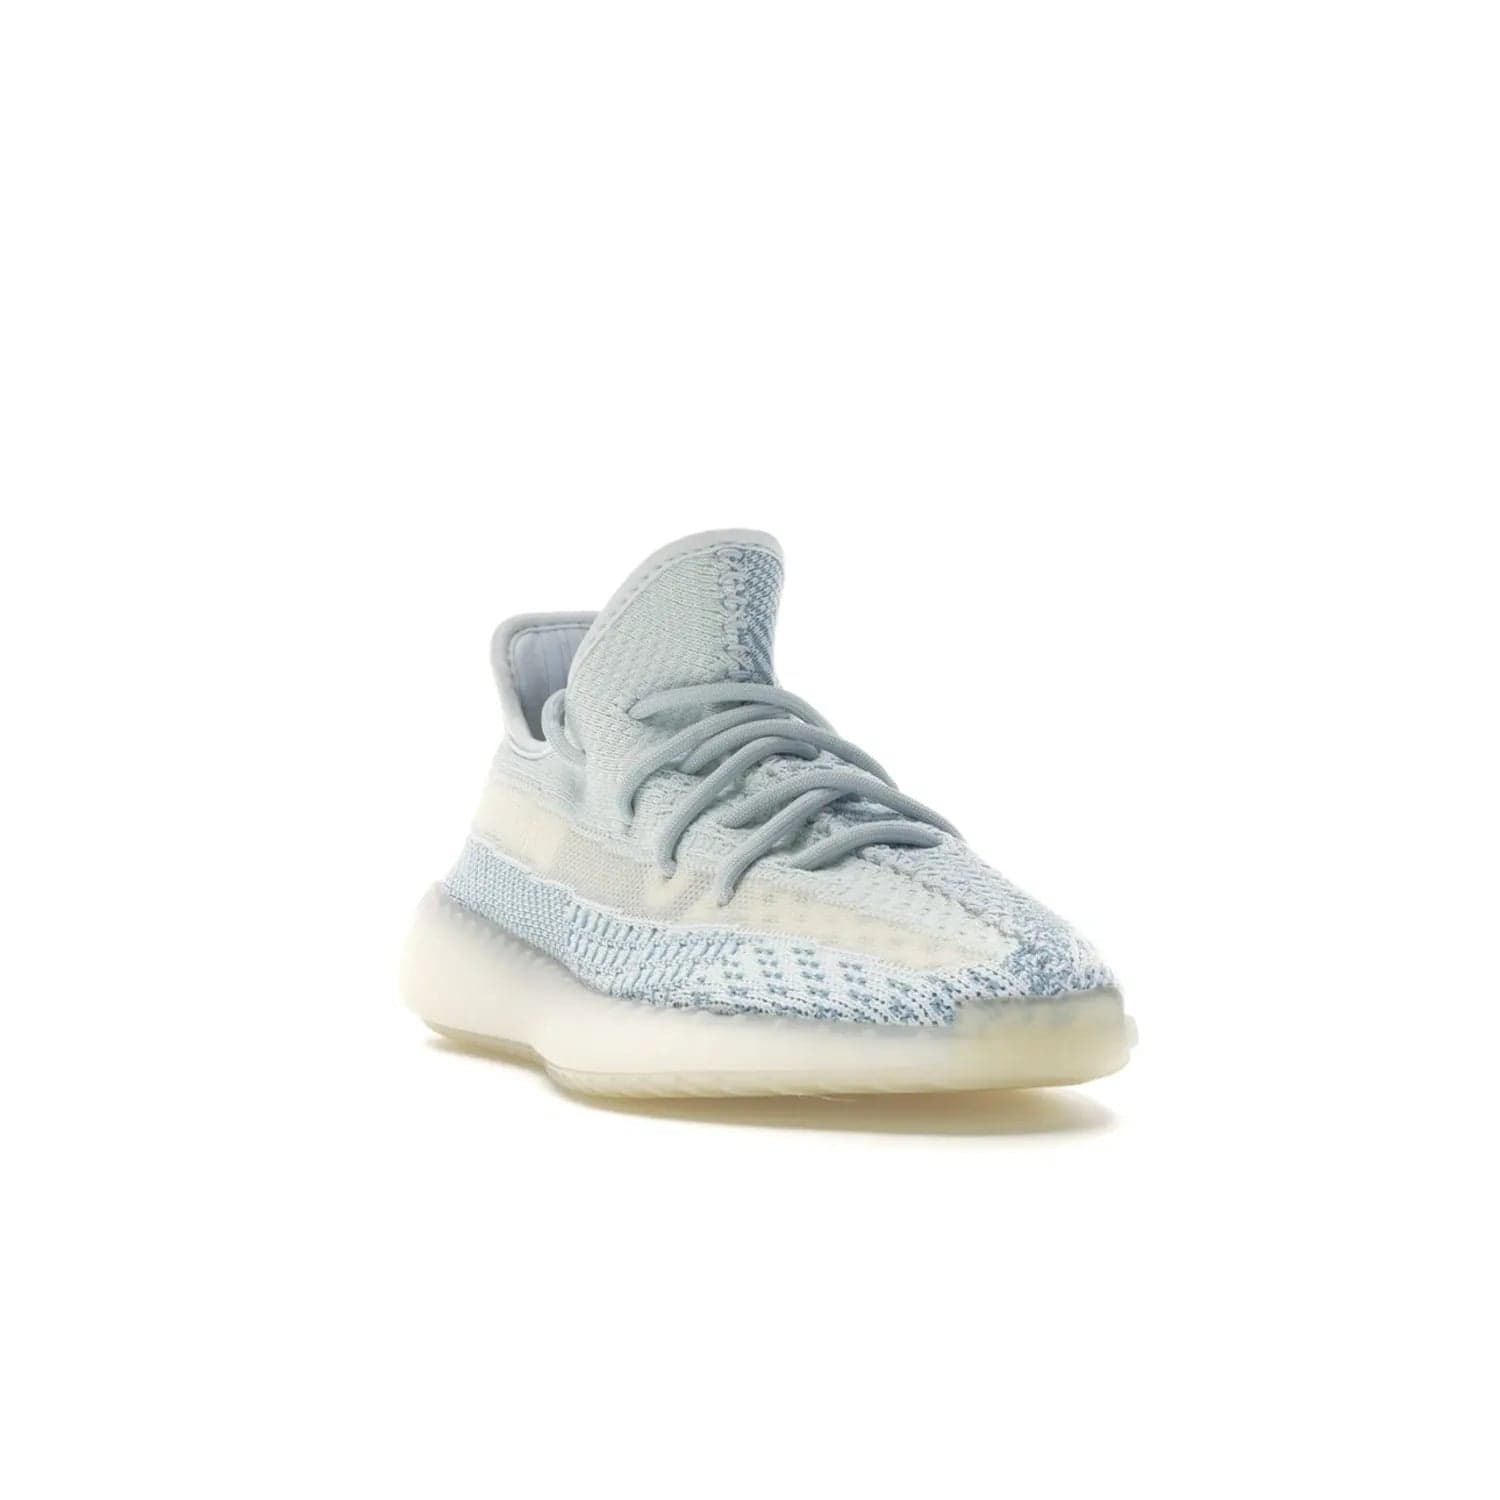 adidas Yeezy Boost 350 V2 Cloud White (Non-Reflective) - Image 7 - Only at www.BallersClubKickz.com - Adidas Yeezy Boost 350 V2 Cloud White (Non-Reflective) features Primeknit fabric and a unique, eye-catching design of cream, bluish-white, and transparent strip. Step out in timeless style with this eye-catching sneaker.